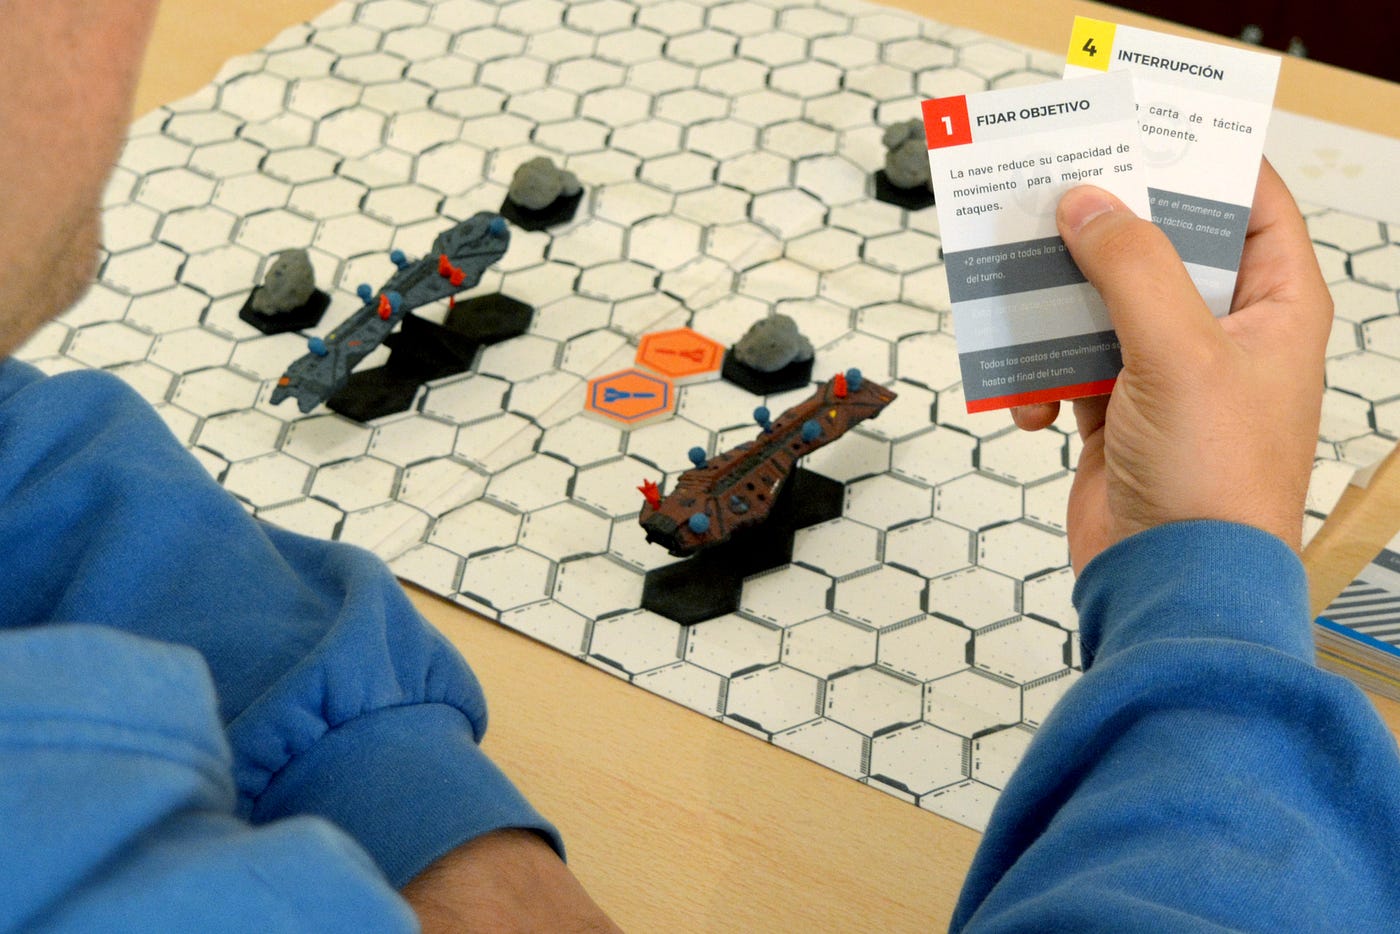 Free Course: Demystifying Board Game Design from AICTE